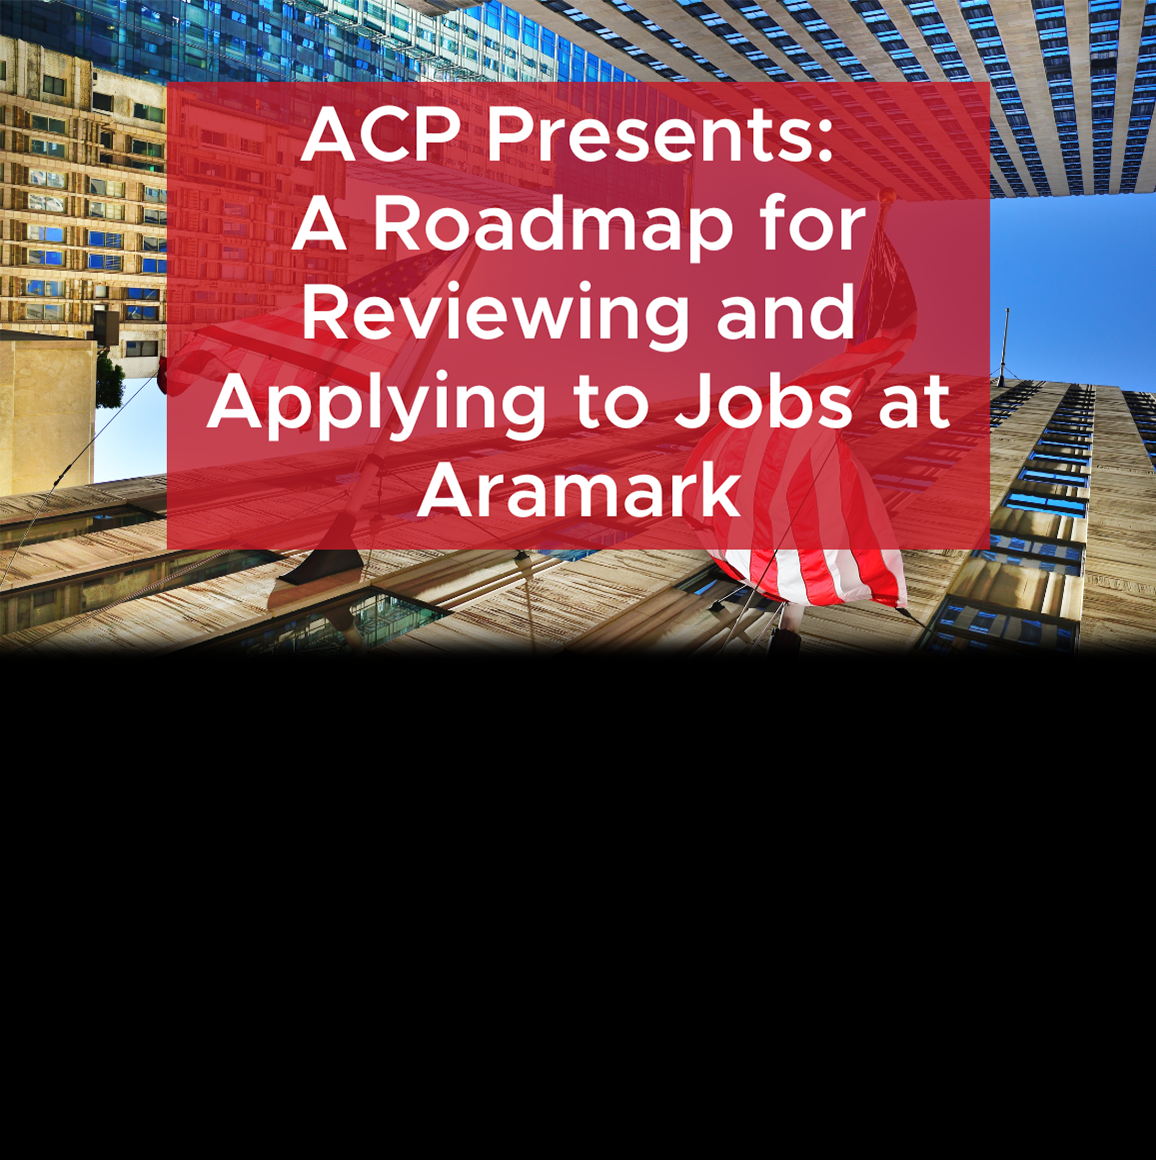 Aramark - A Roadmap for Reviewing and Applying to Jobs